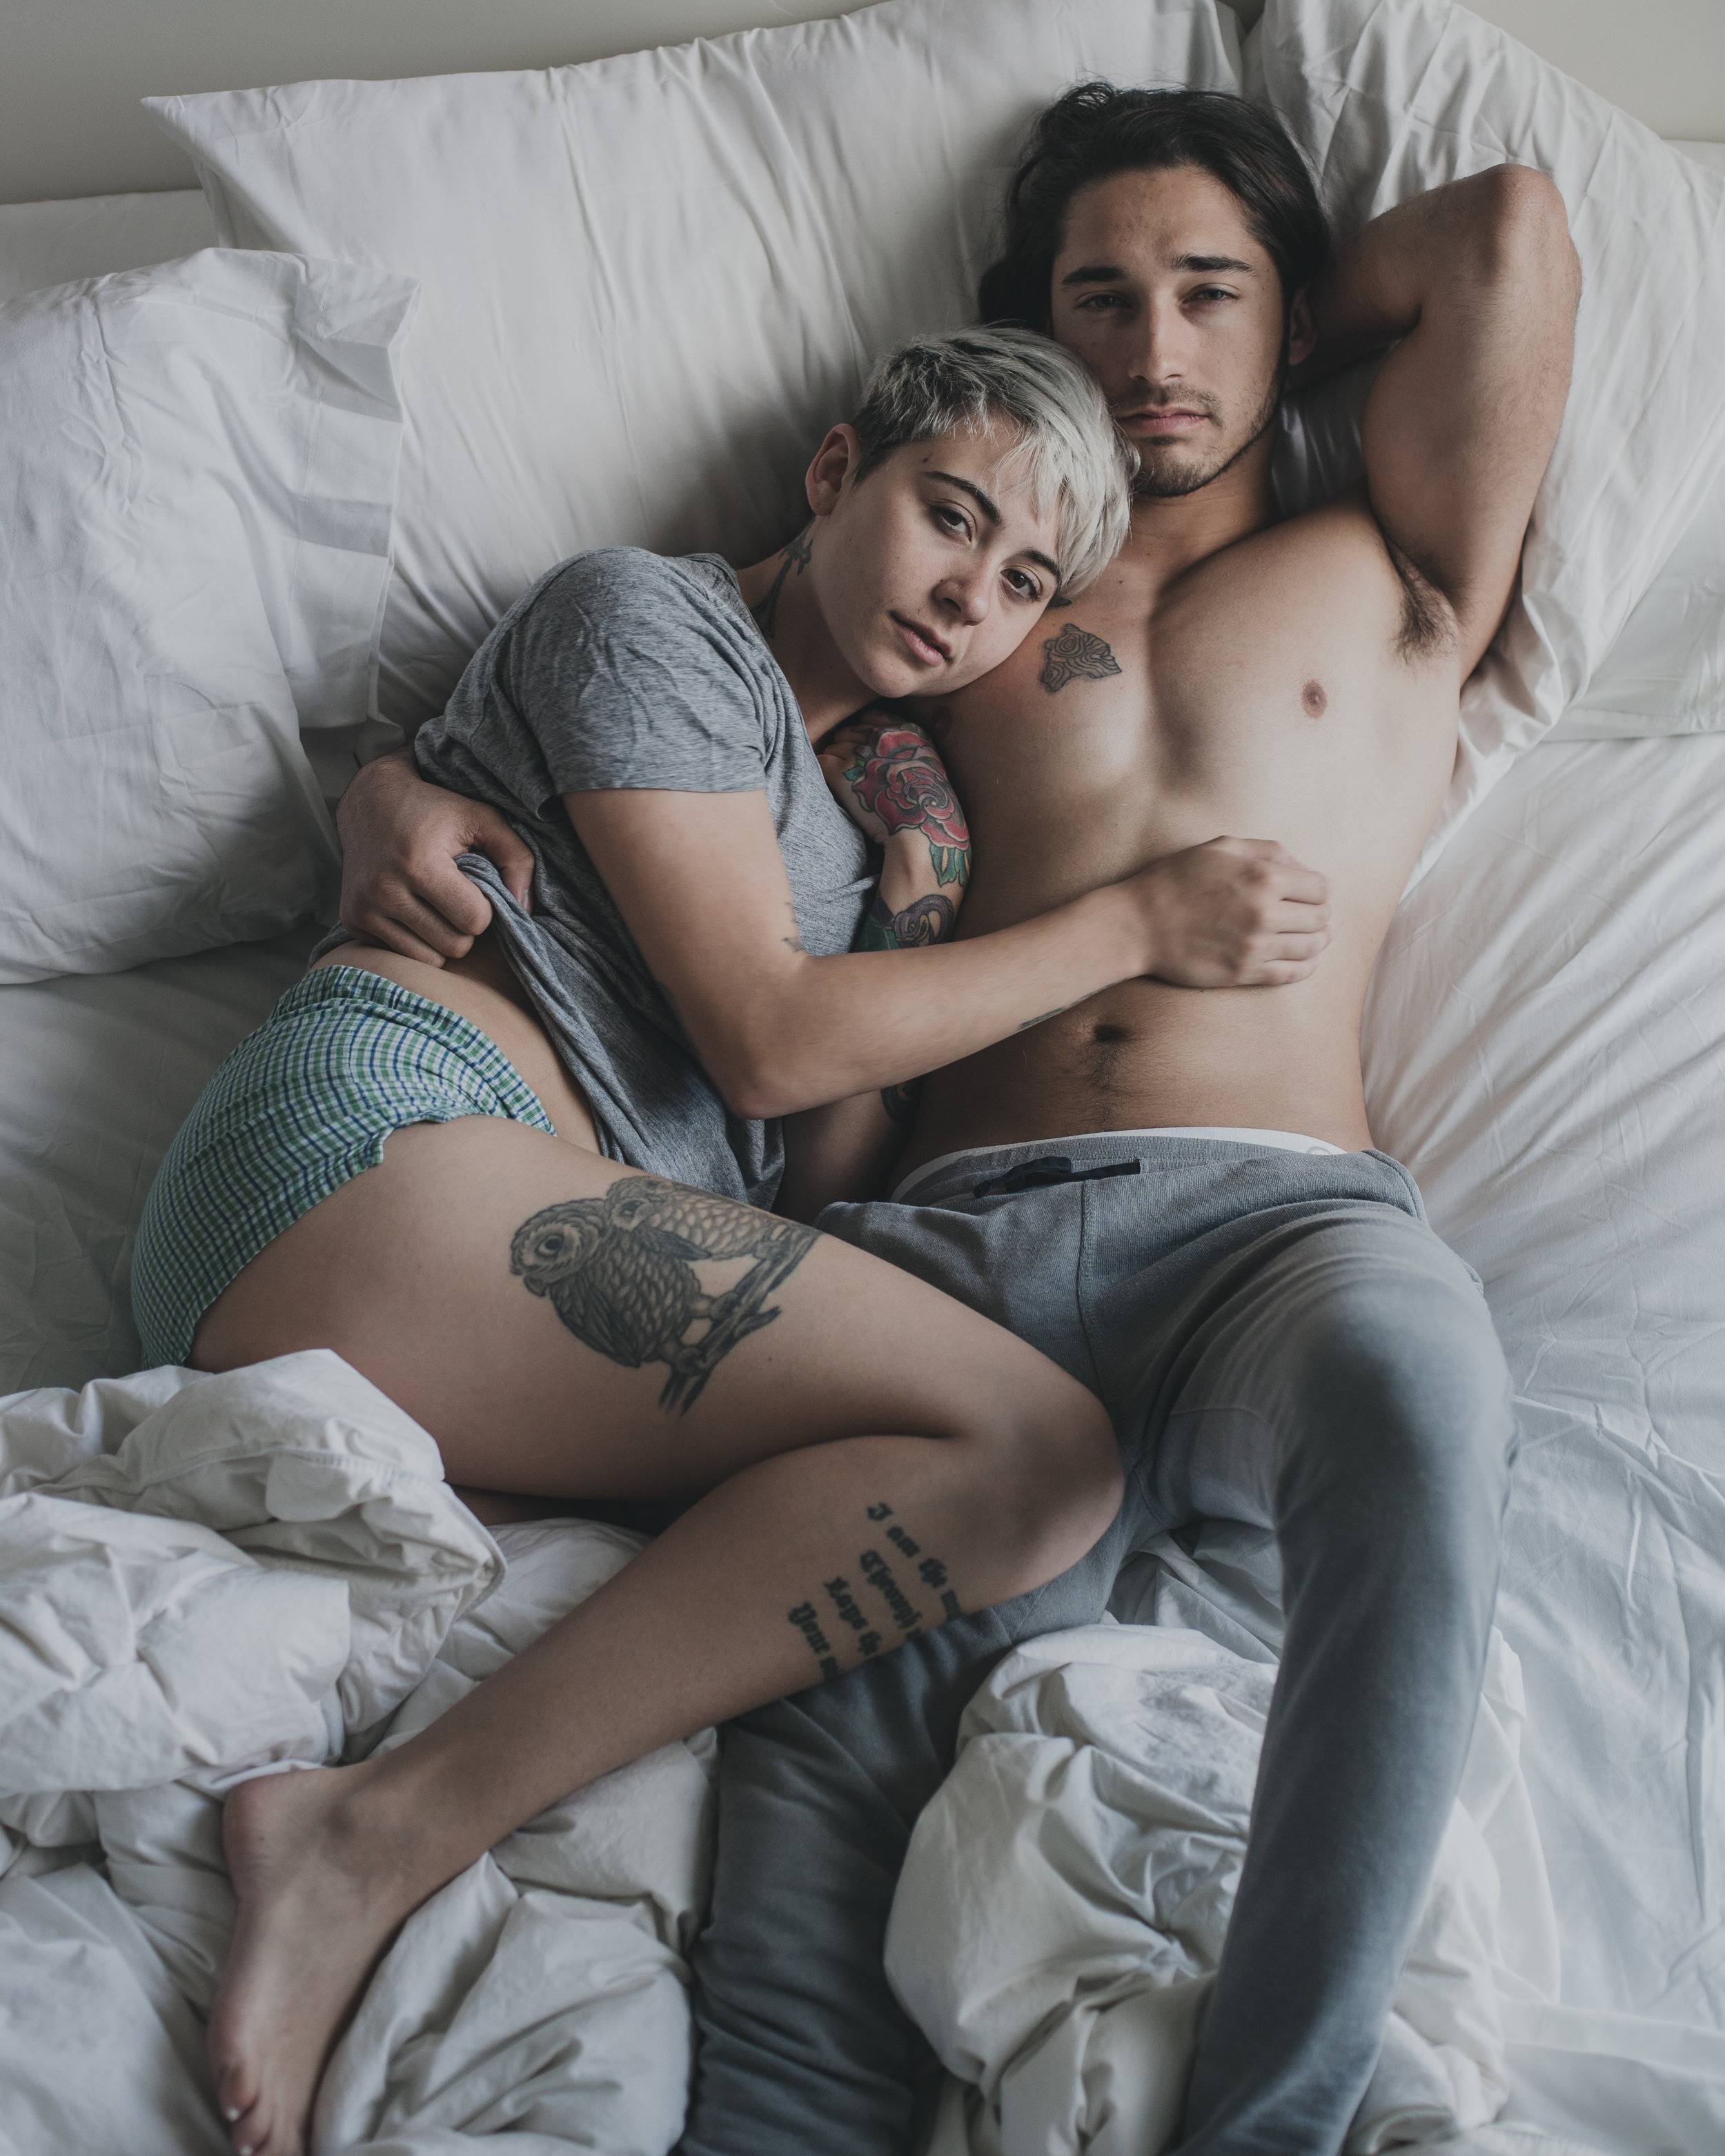 © duston-lifestyle-intimate-couple-bed-home-tattooed.jpg